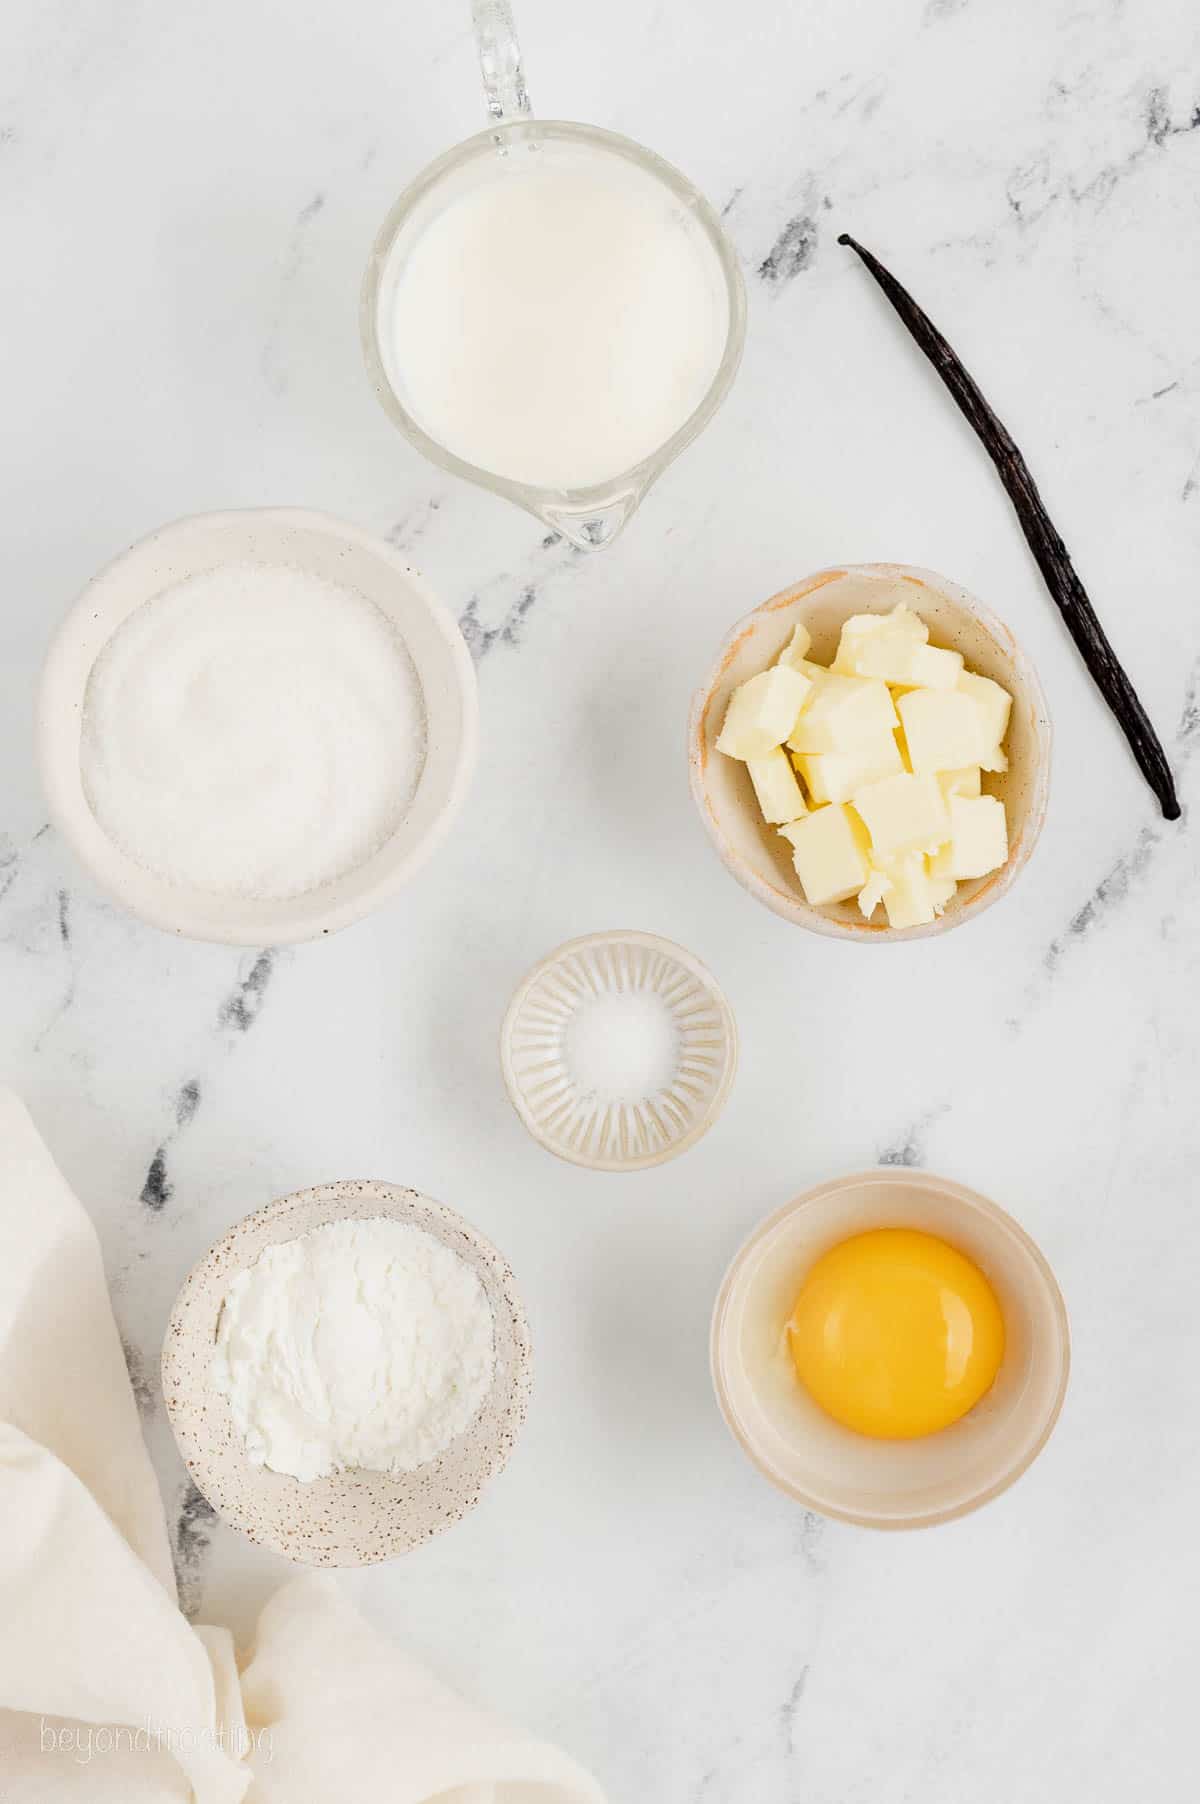 The ingredients for homemade vanilla pastry cream.